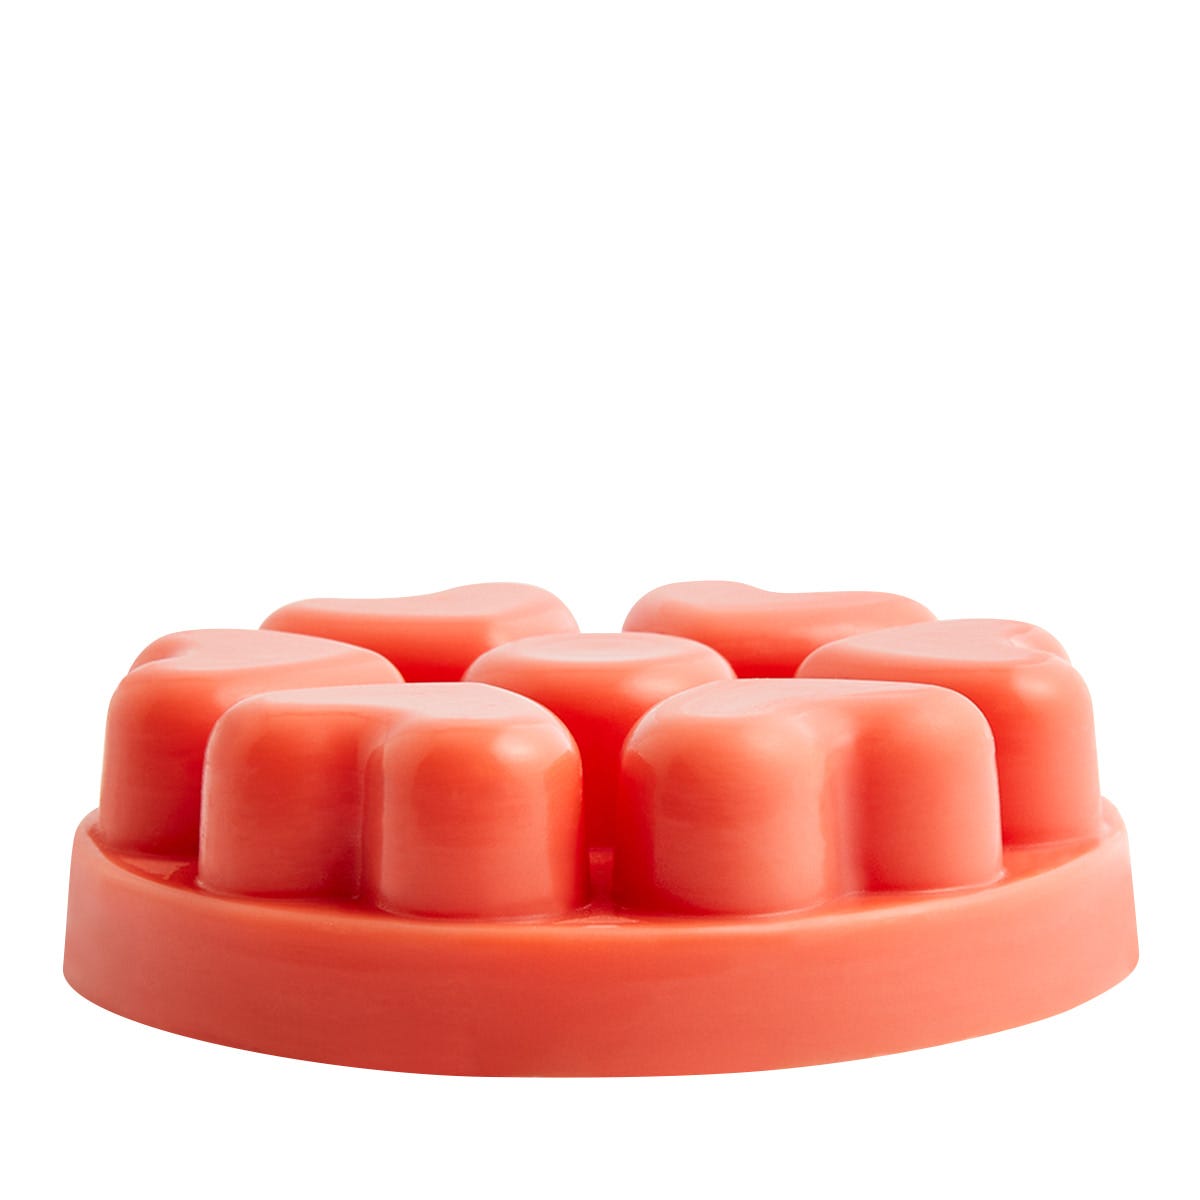 Grapefruit & Rosemary Scent Plus® Heart Melts - PartyLite US